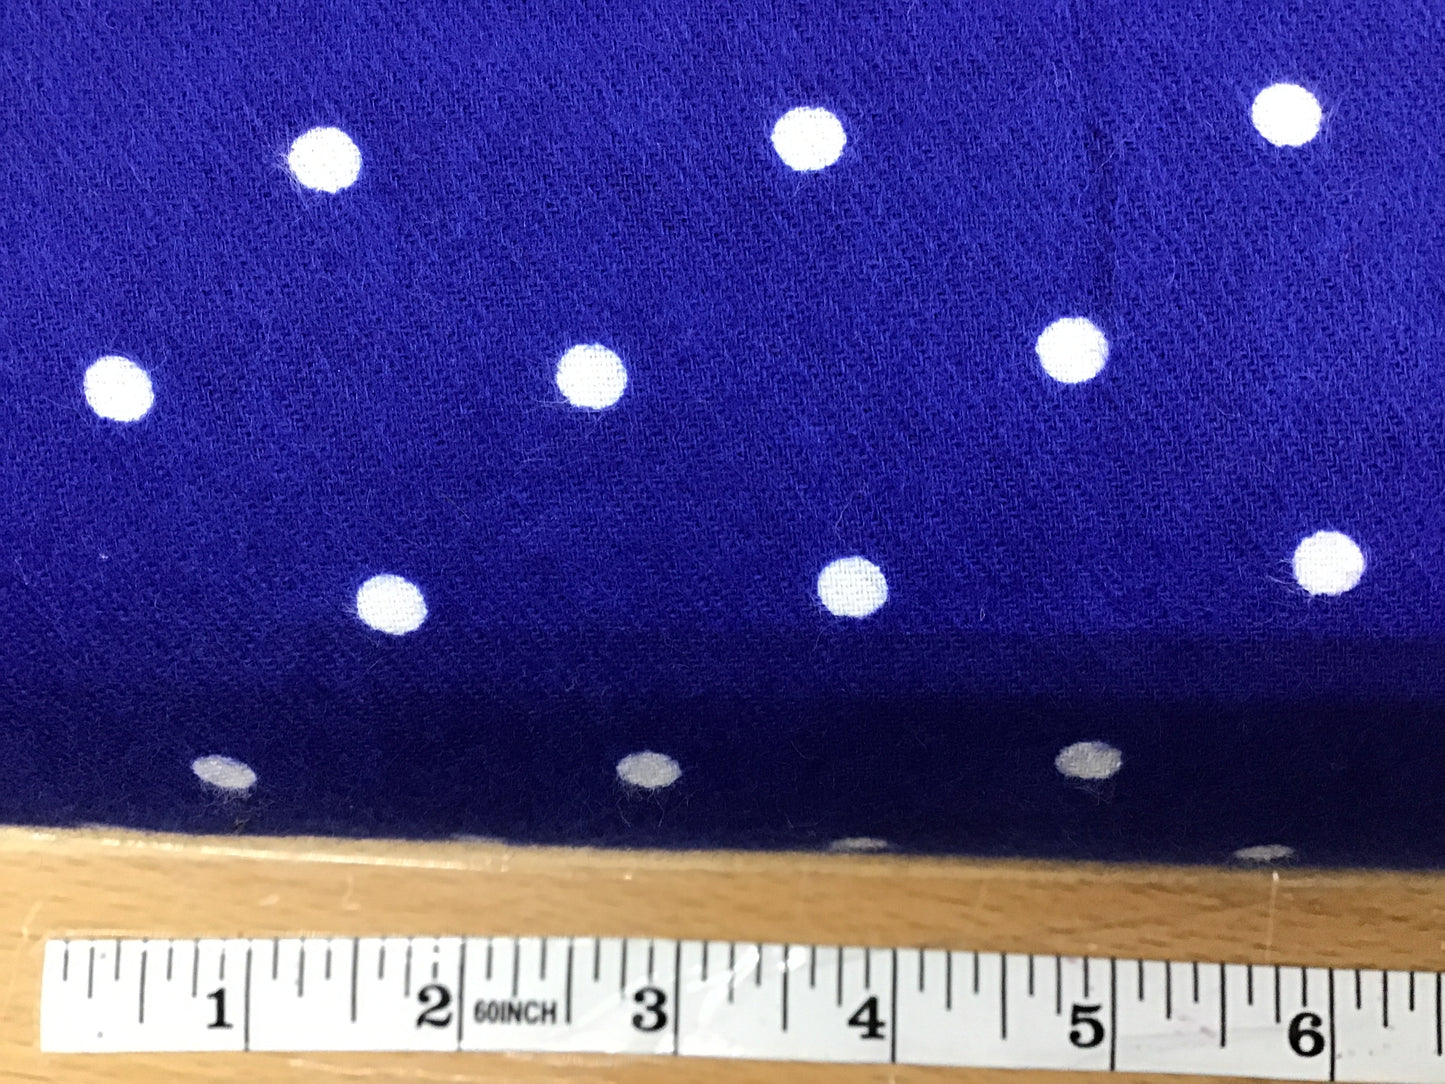 Flannel 2486-Royal Blue with white dots